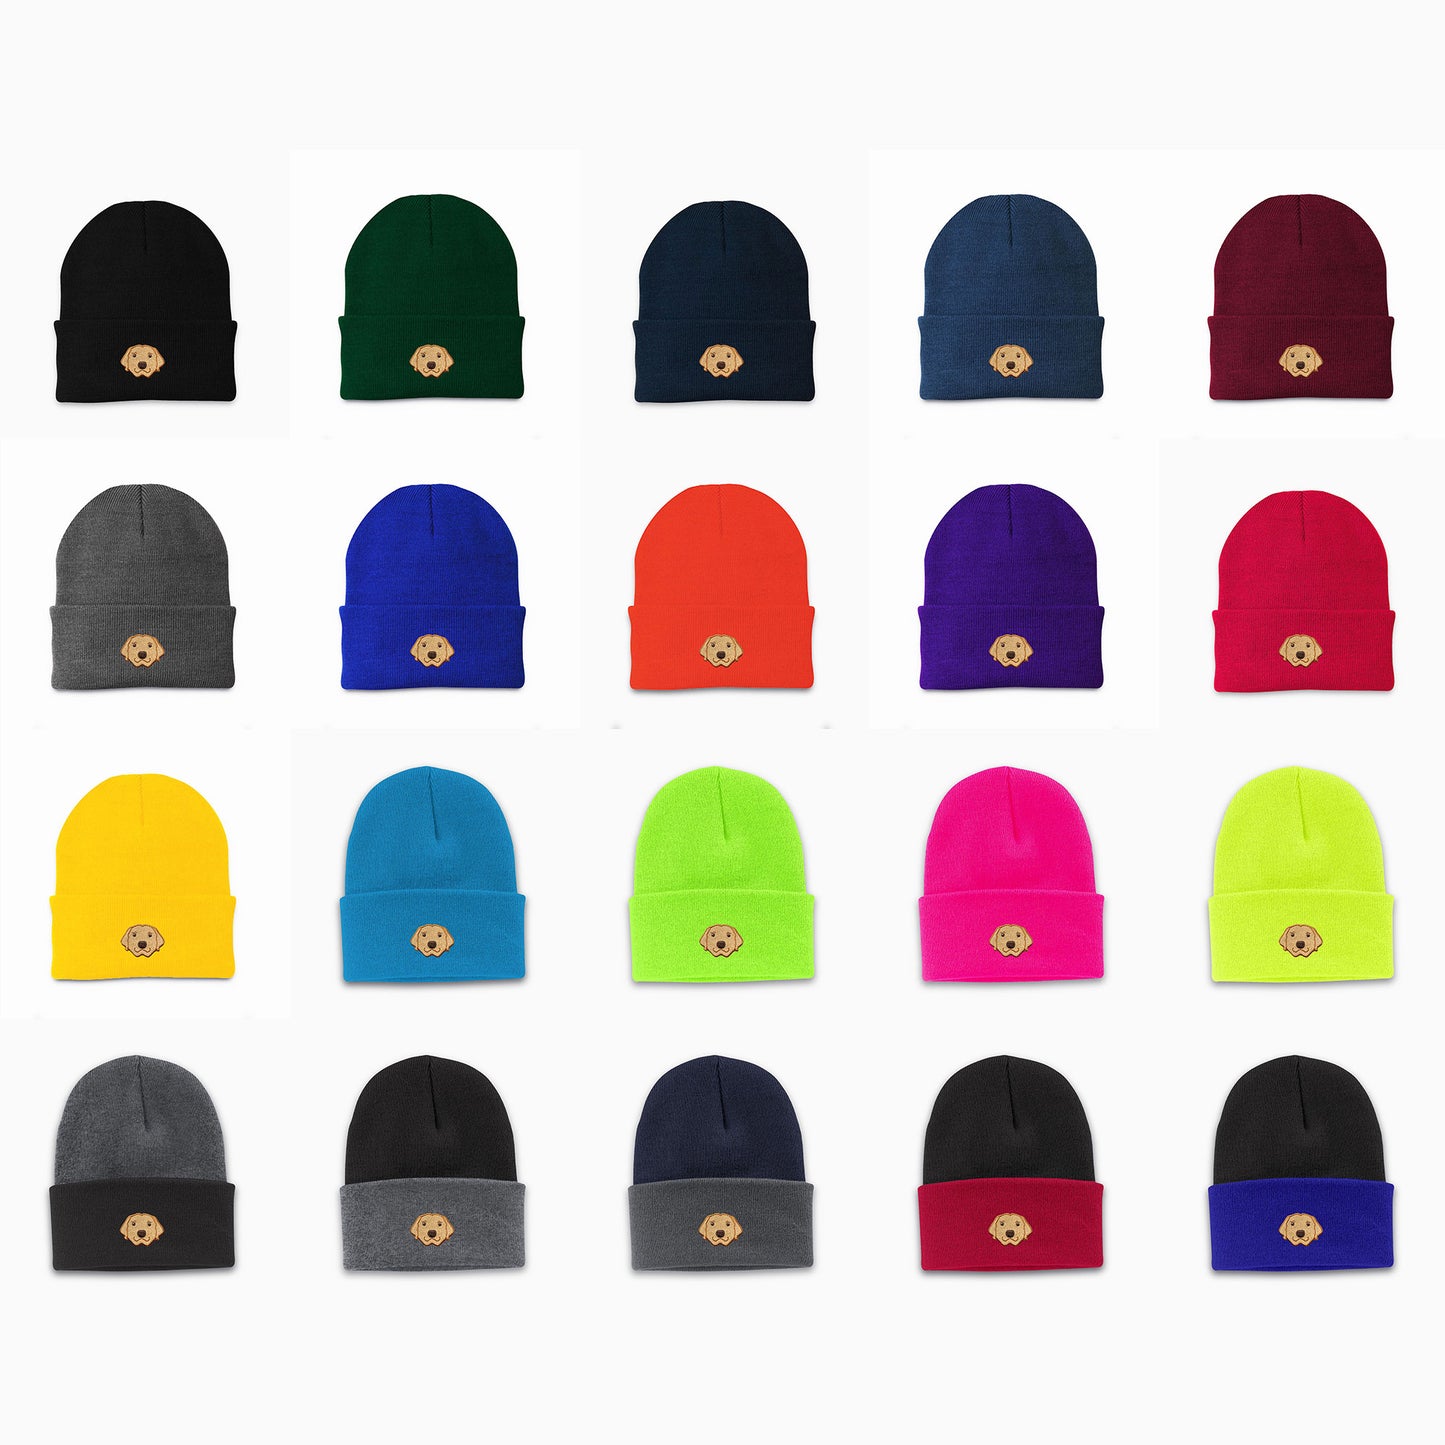 All Colors of our custom dog dad cuff beanies